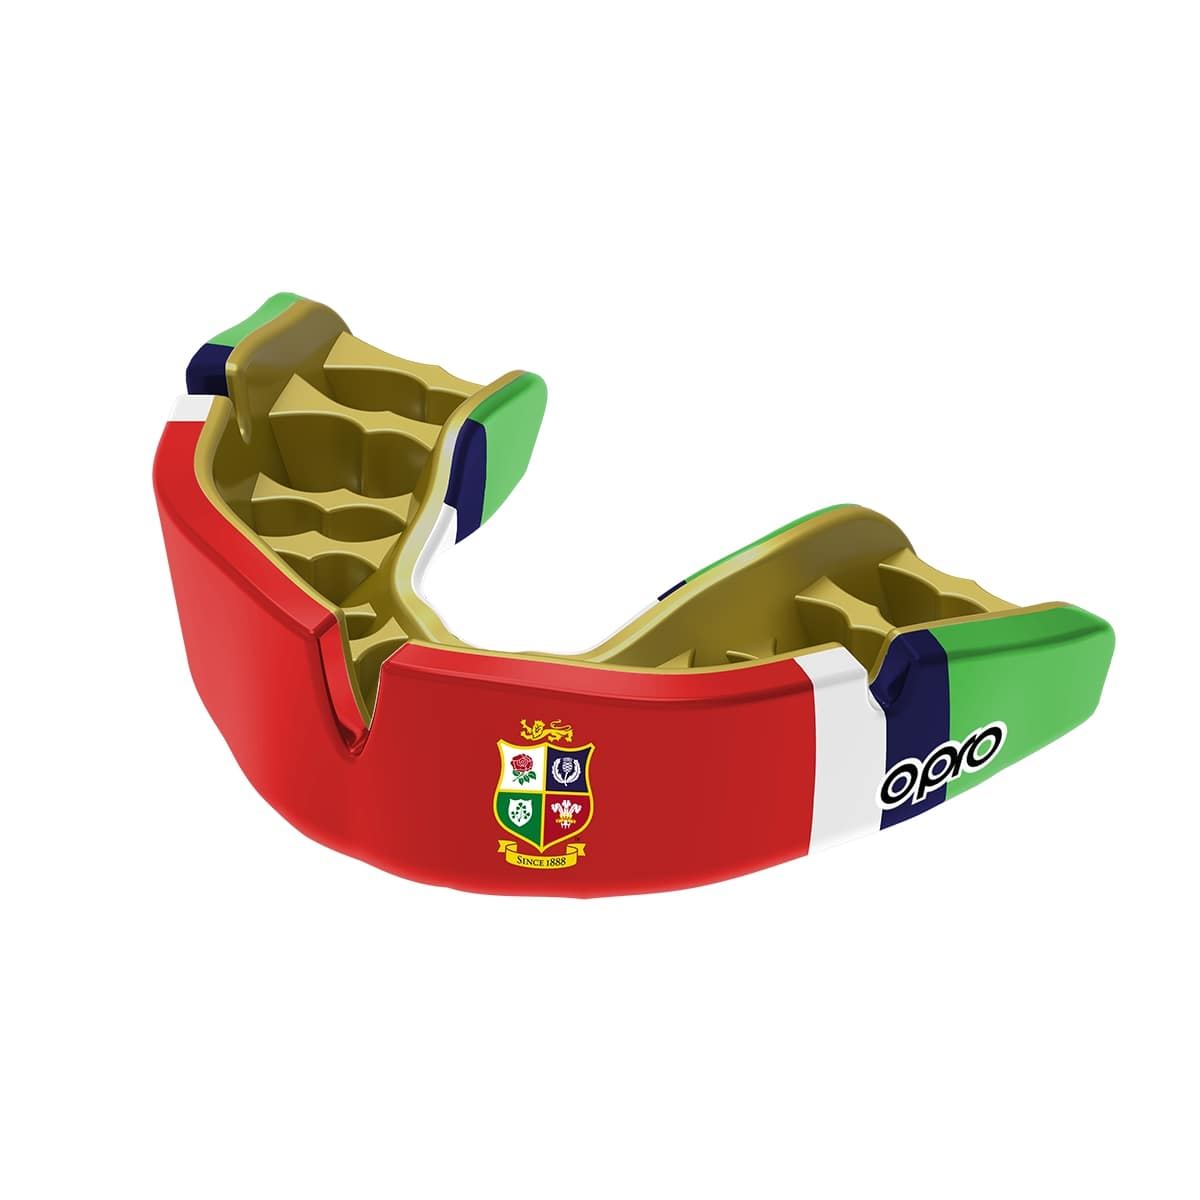 Men's Rugby Protective Mouthguard Opro Instant Custom Fit Licensed 2022 British & Irish Lions